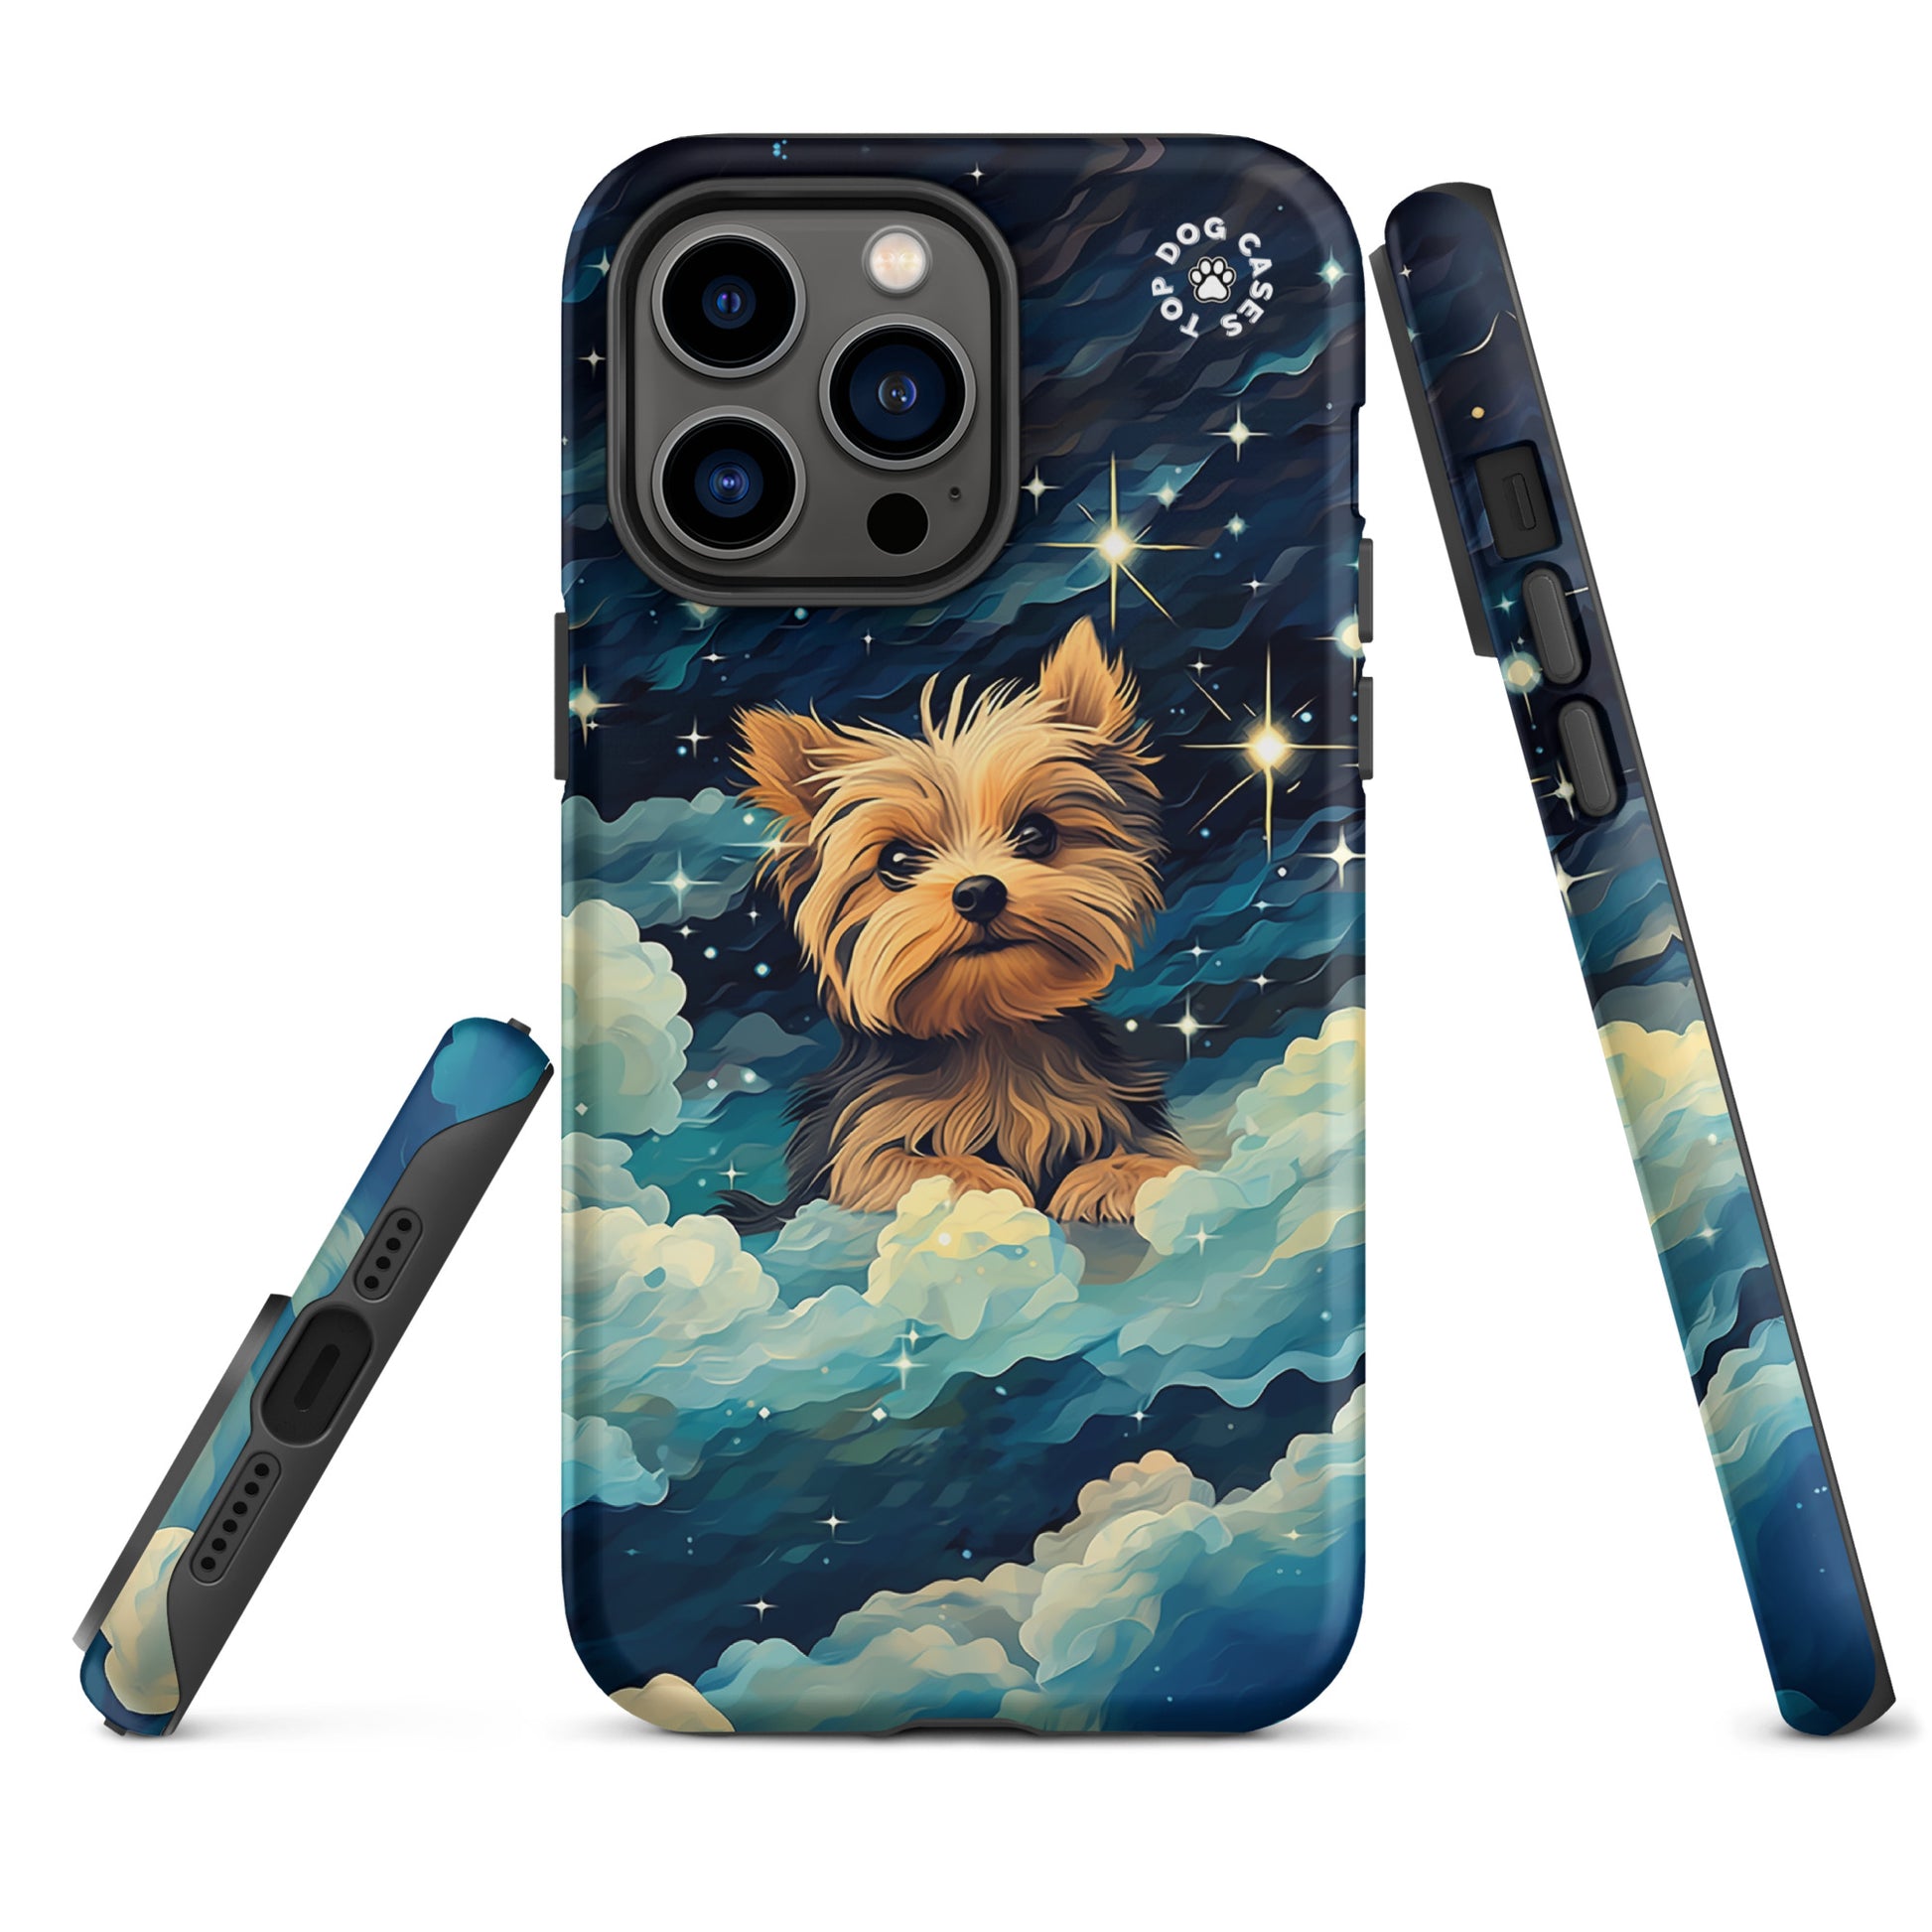 Cute iPhone Cases Yorkie - Top Dog Cases - #CuteDog, #CuteDogs, #DogPhoneCase, #dogs, #iPhone, #iPhone11, #iphone11case, #iPhone12, #iPhone12case, #iPhone13, #iPhone13case, #iPhone13DogCase, #iPhone13Mini, #iPhone13Pro, #iPhone13ProMax, #iPhone14, #iPhone14case, #iPhone14DogCase, #iPhone14Plus, #iPhone14Pluscase, #iPhone14Pro, #iPhone14ProMax, #iPhone14ProMaxCase, #iPhone15, #iPhone15case, #iPhonecase, #iphonedogcase, #Yorkie